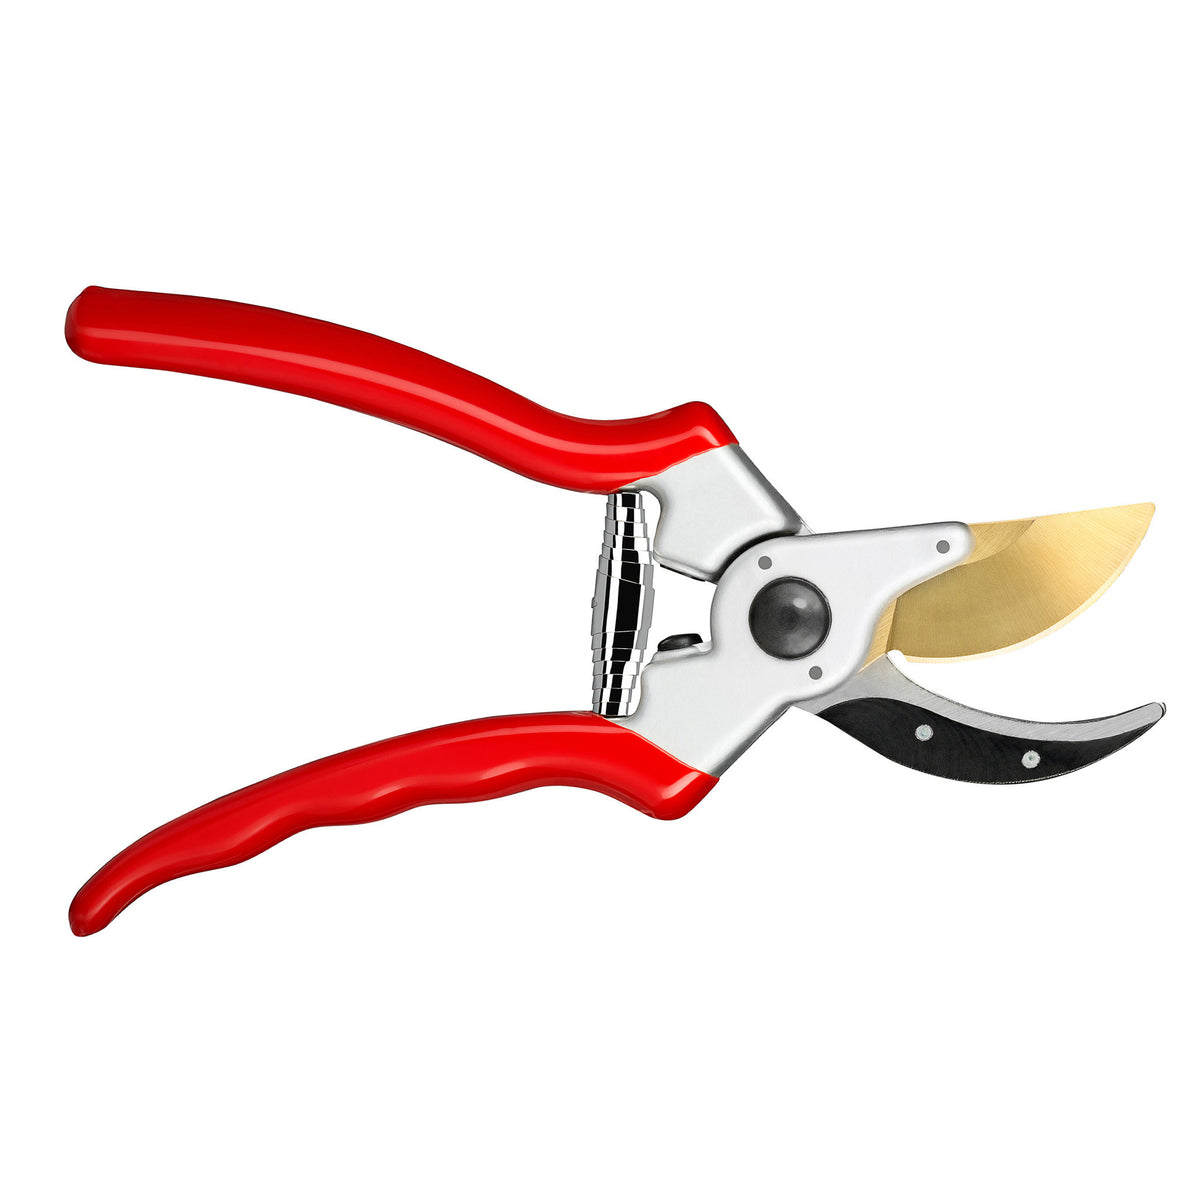 ClassicPRO Bypass Pruning Shears